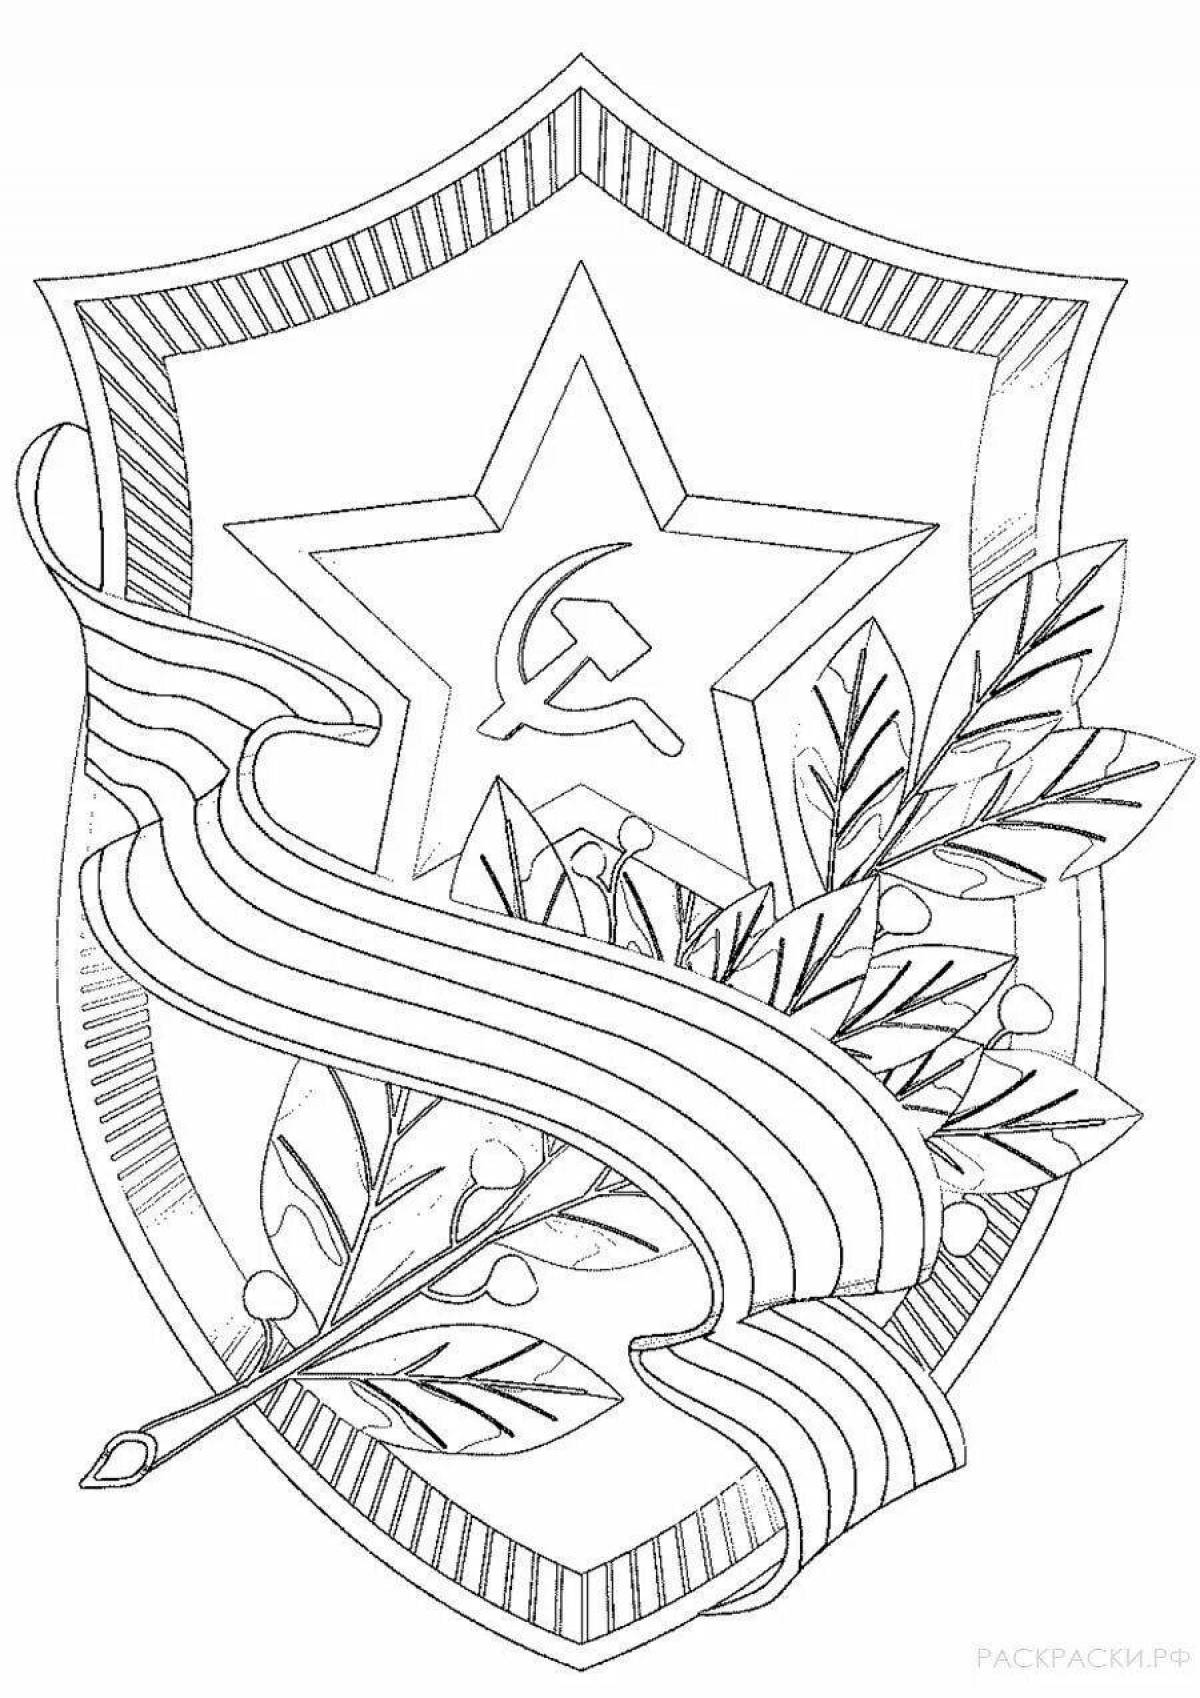 Colorful St. George ribbon coloring page for kids